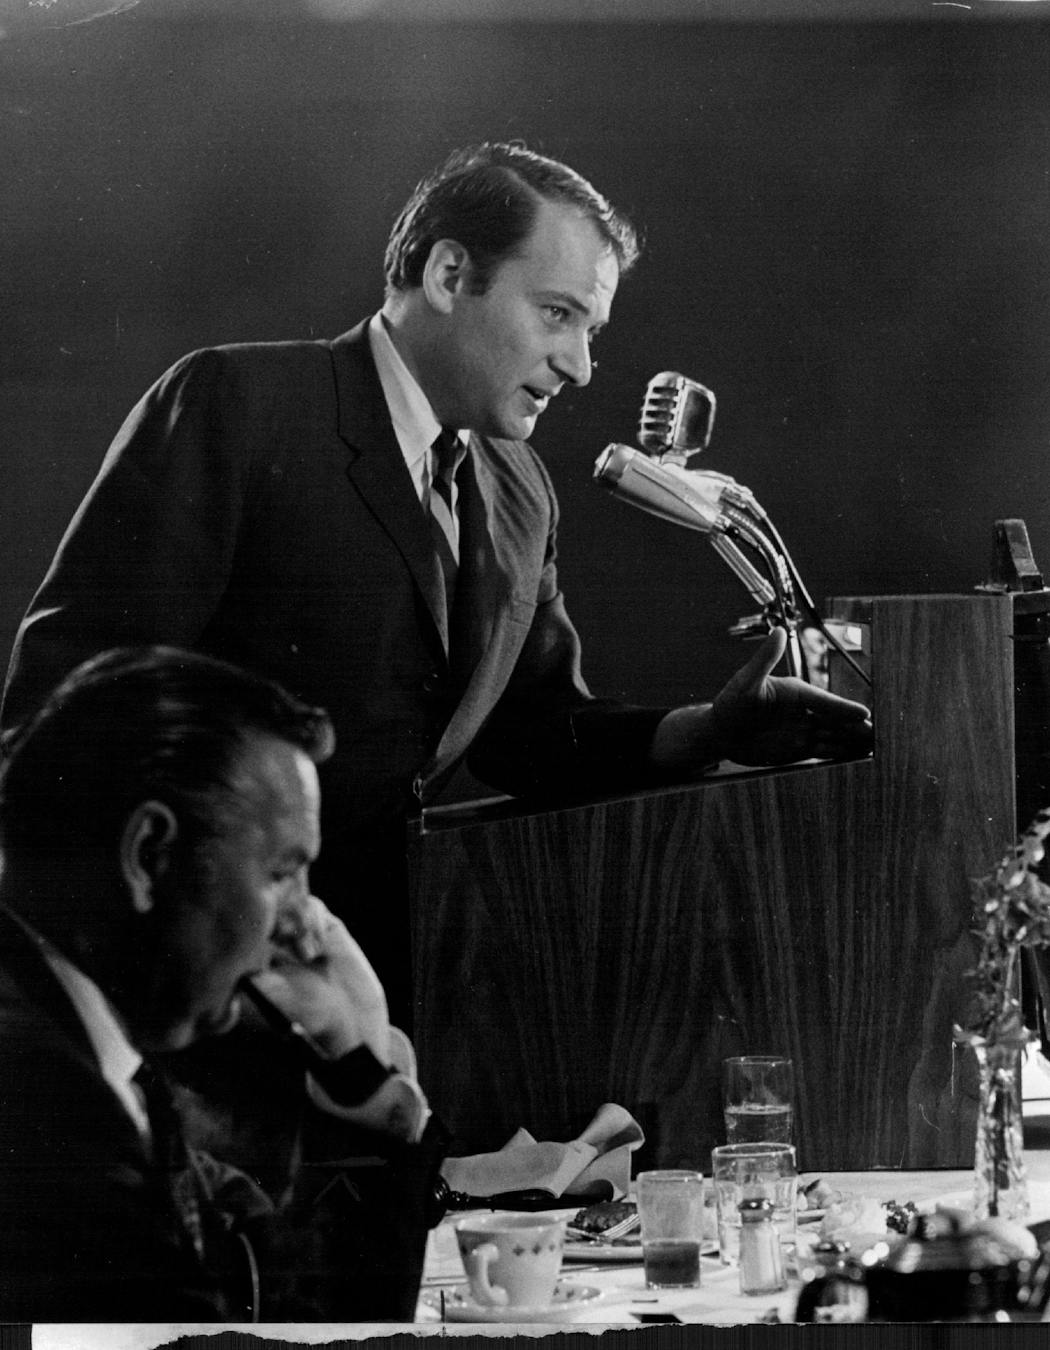 Dan Cohen addressed business leaders during his mayoral run in 1969.